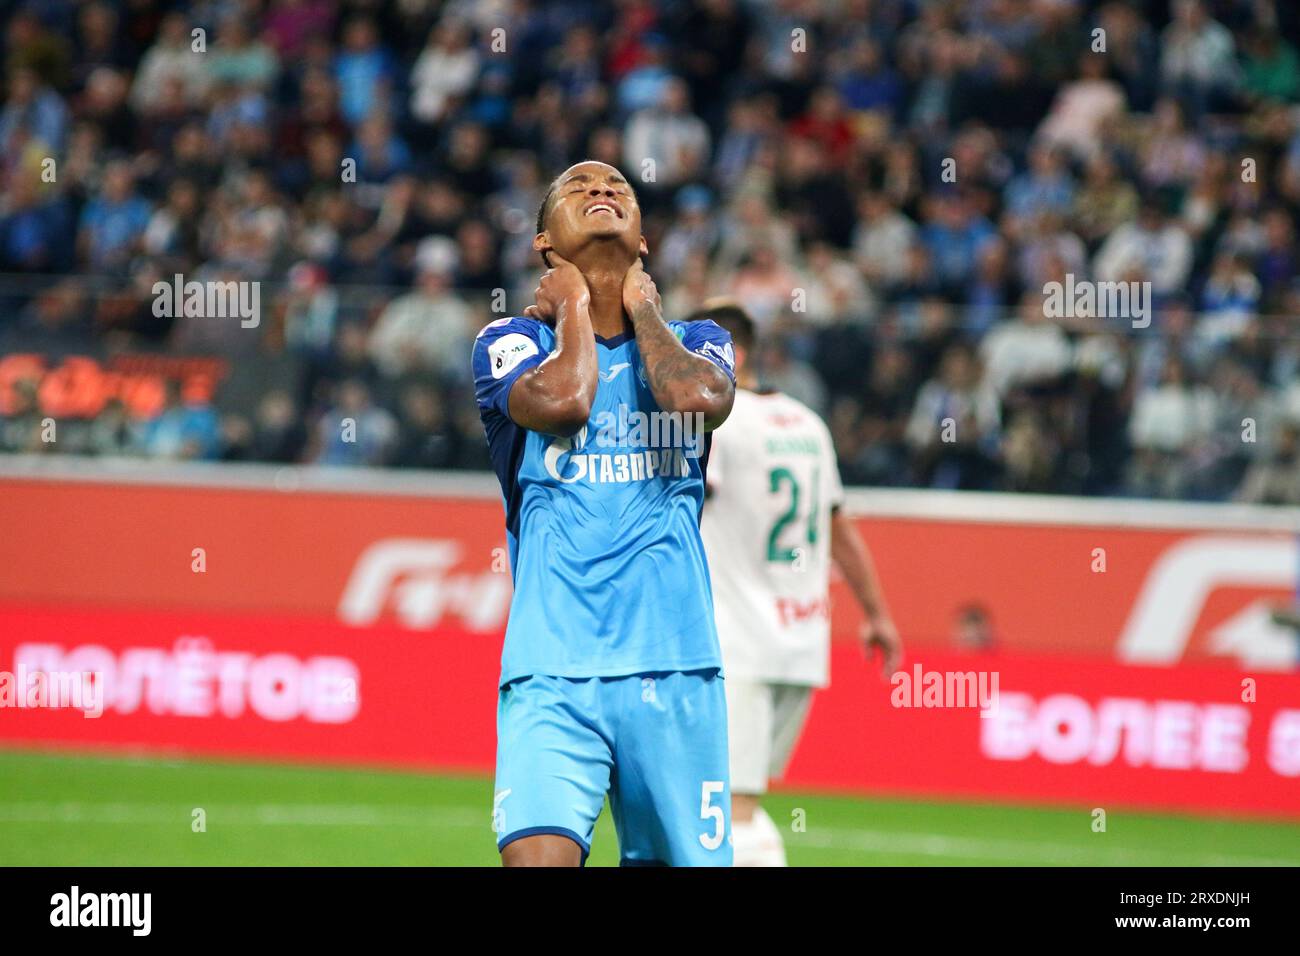 Saint Petersburg, Russia. 24th Sep, 2023. Wilmar Enrique Barrios Teran, known as Wilmar Barrios (5) of Zenit seen during the Russian Premier League football match between Zenit Saint Petersburg and Lokomotiv Moscow at Gazprom Arena. Final score; Zenit 1:2 Lokomotiv Moscow. Credit: SOPA Images Limited/Alamy Live News Stock Photo